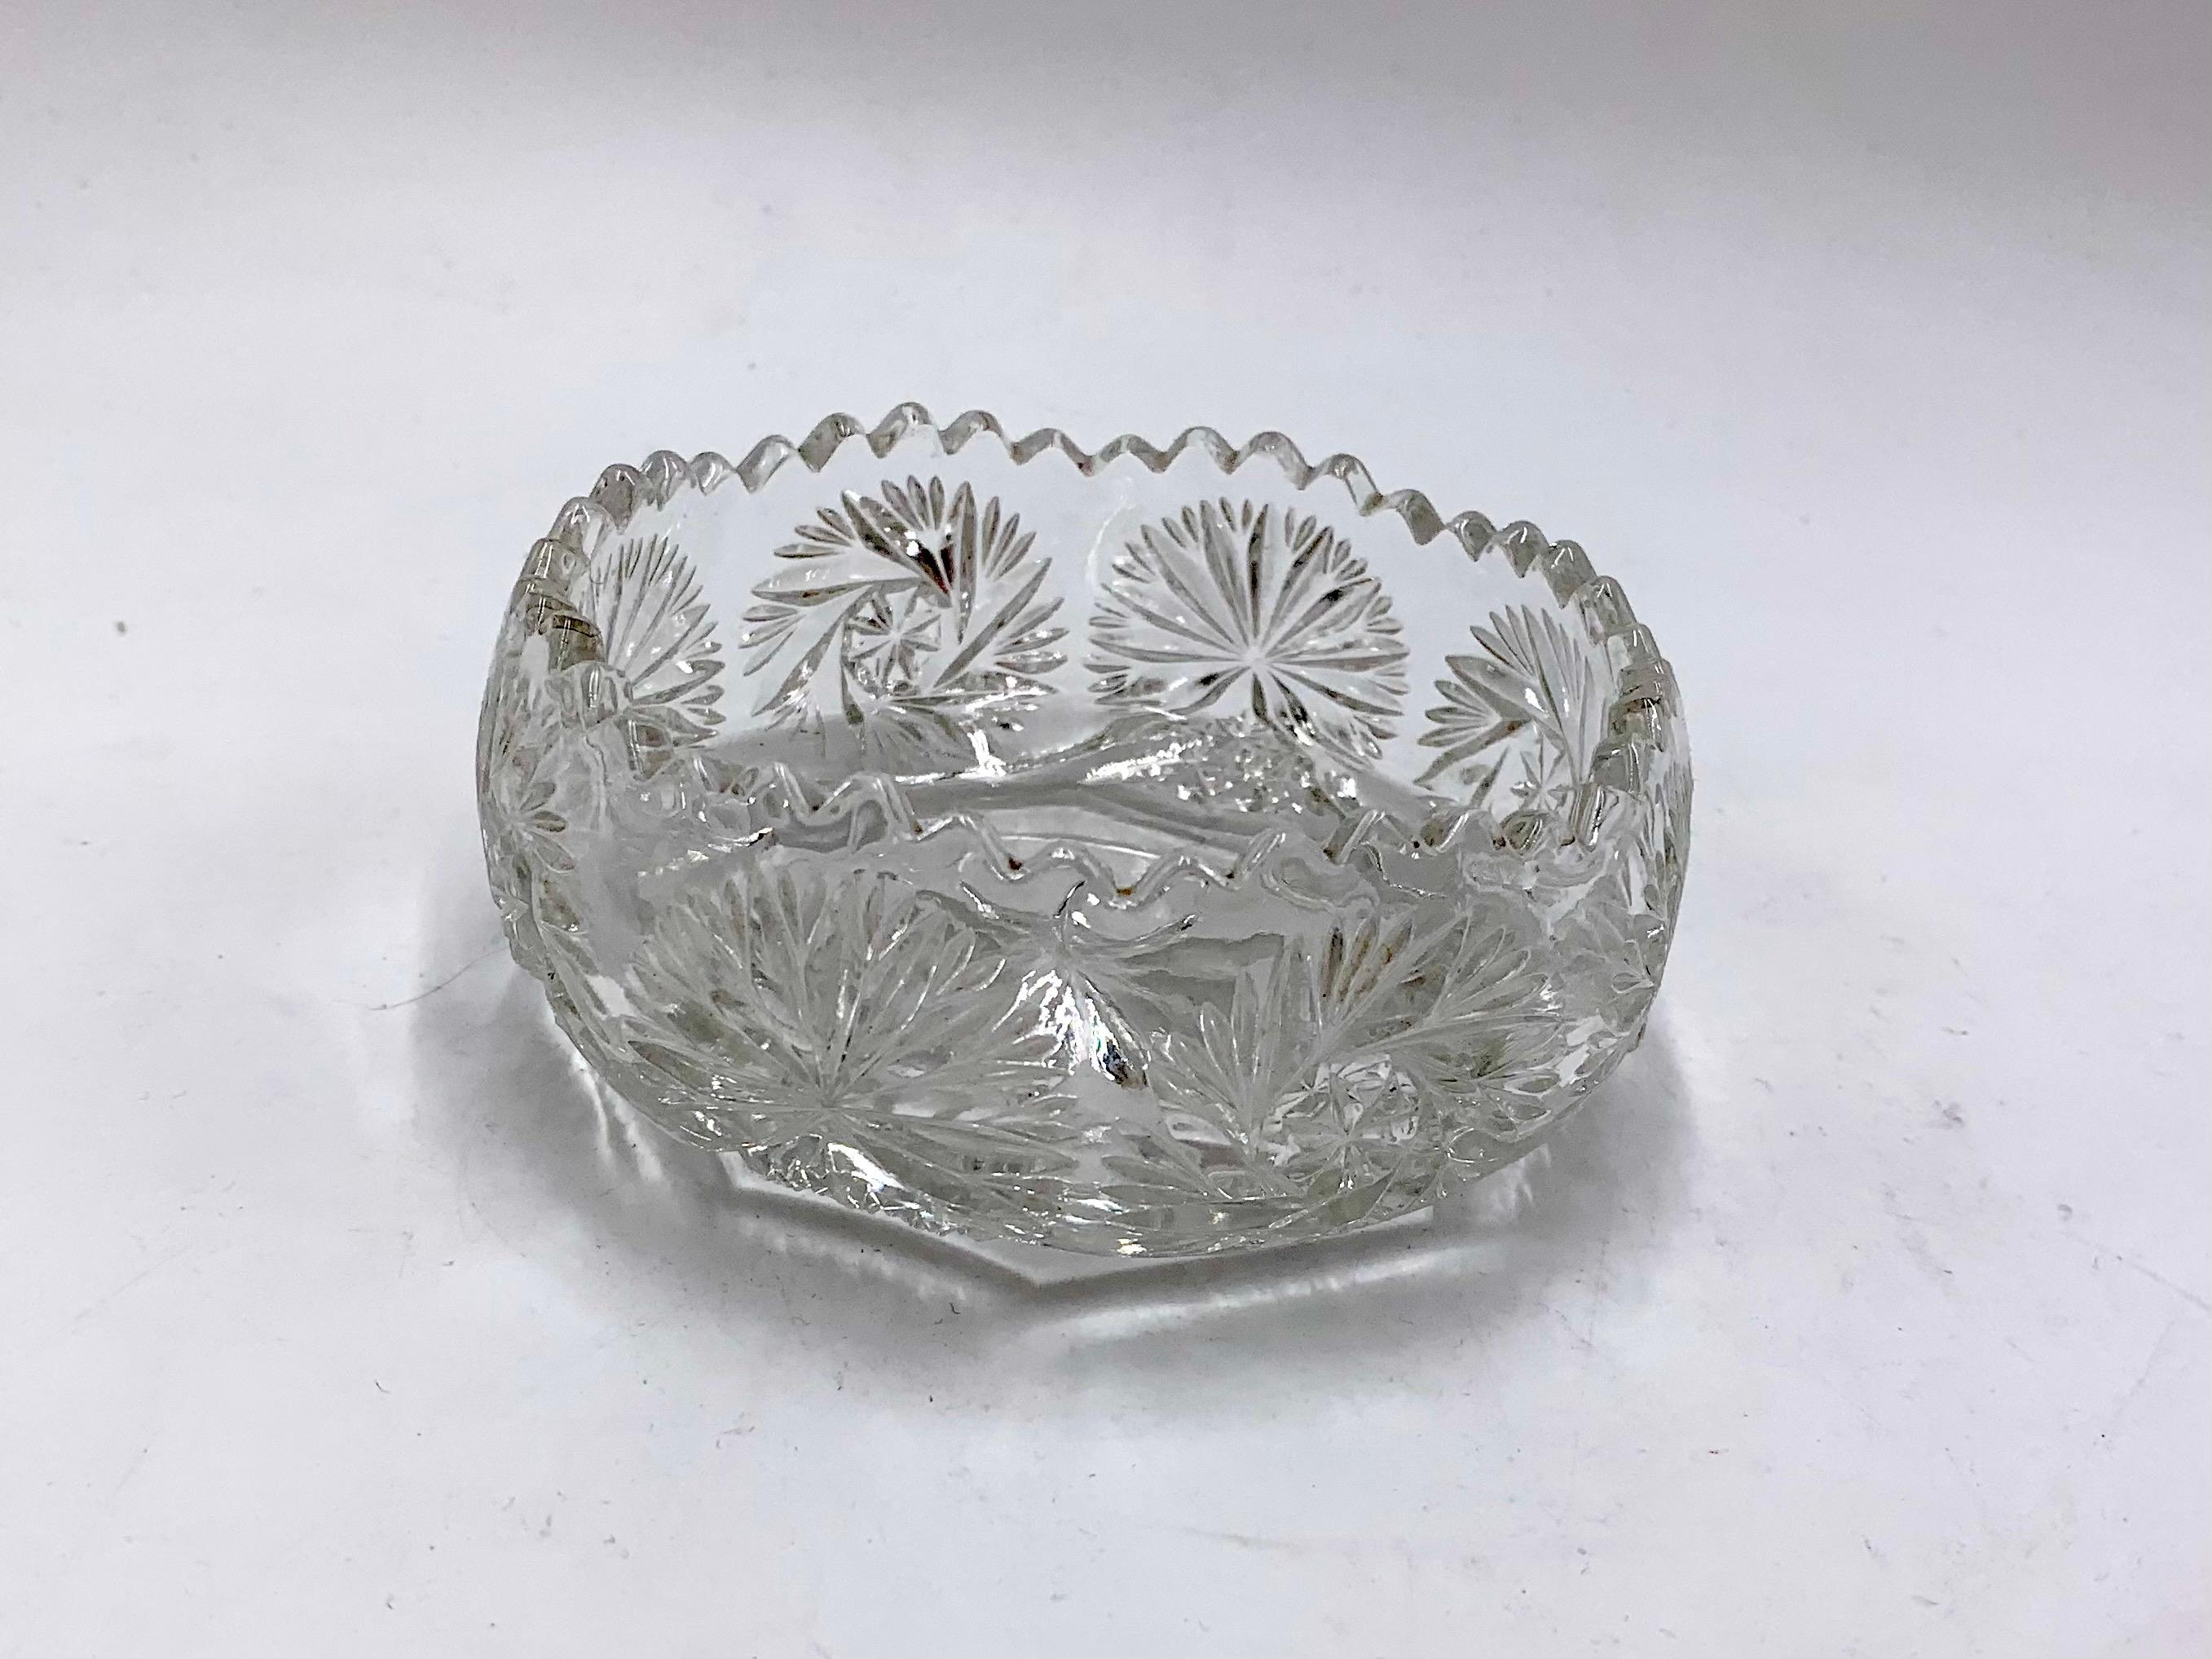 Crystal bowl - platter for sweets.
Made in Poland in the 1950s / 1960s.
Very good condition.
Dimensions: height 5cm, diameter 11.